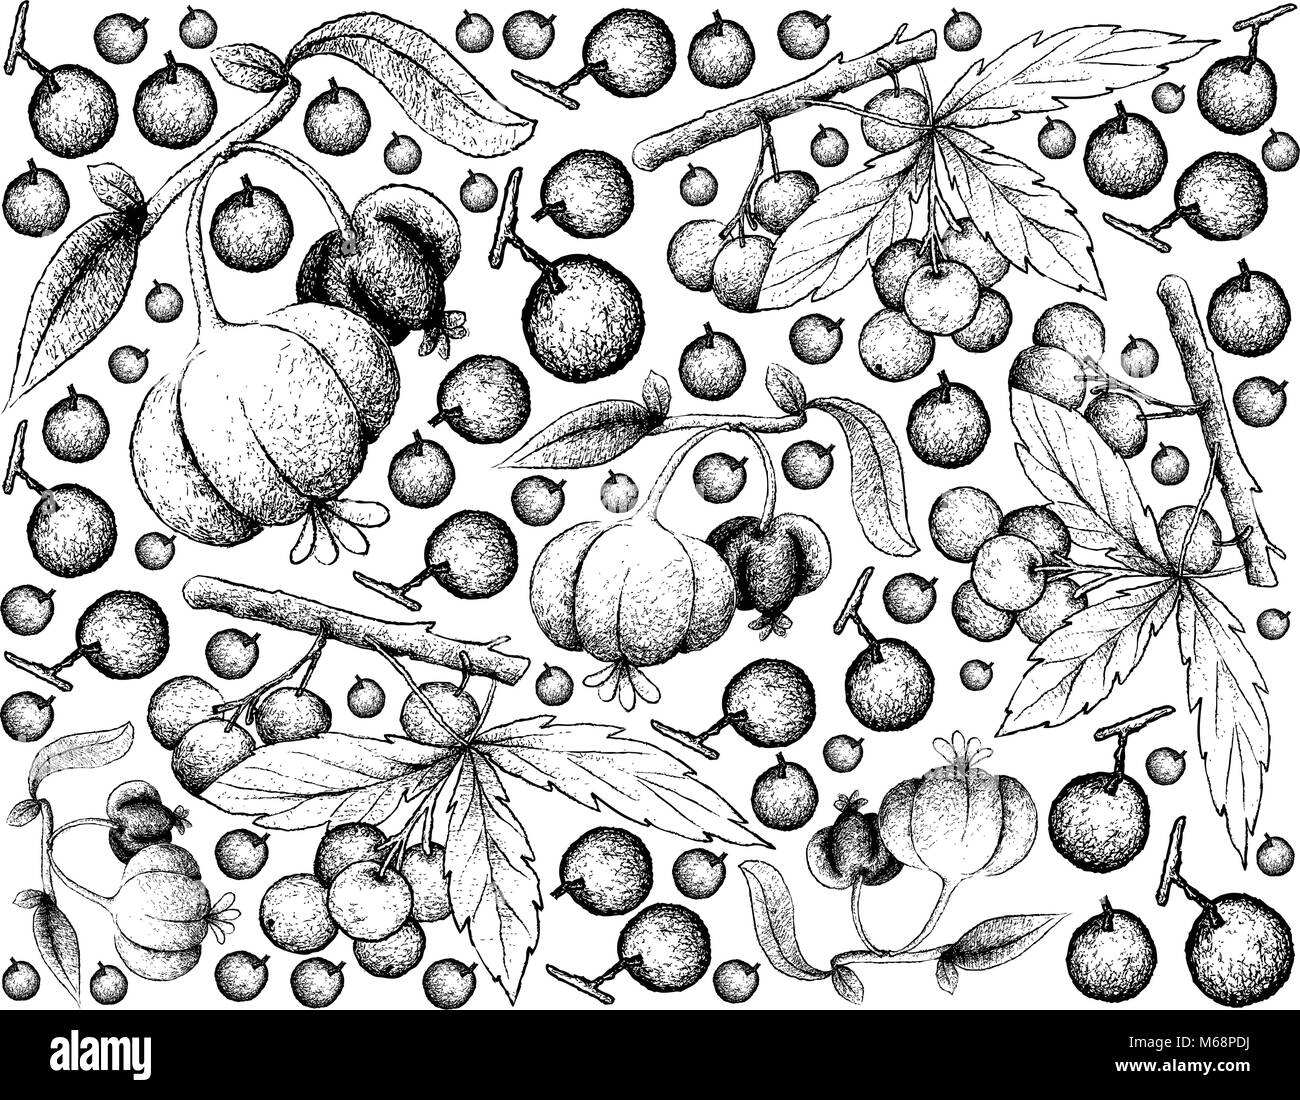 Berry Fruits, Illustration Wallpaper Background of Hand Drawn Sketch Allophylus Edulis or Chal-Chal and Pitanga, Suriname Cherry or Brazilian Cherry F Stock Vector